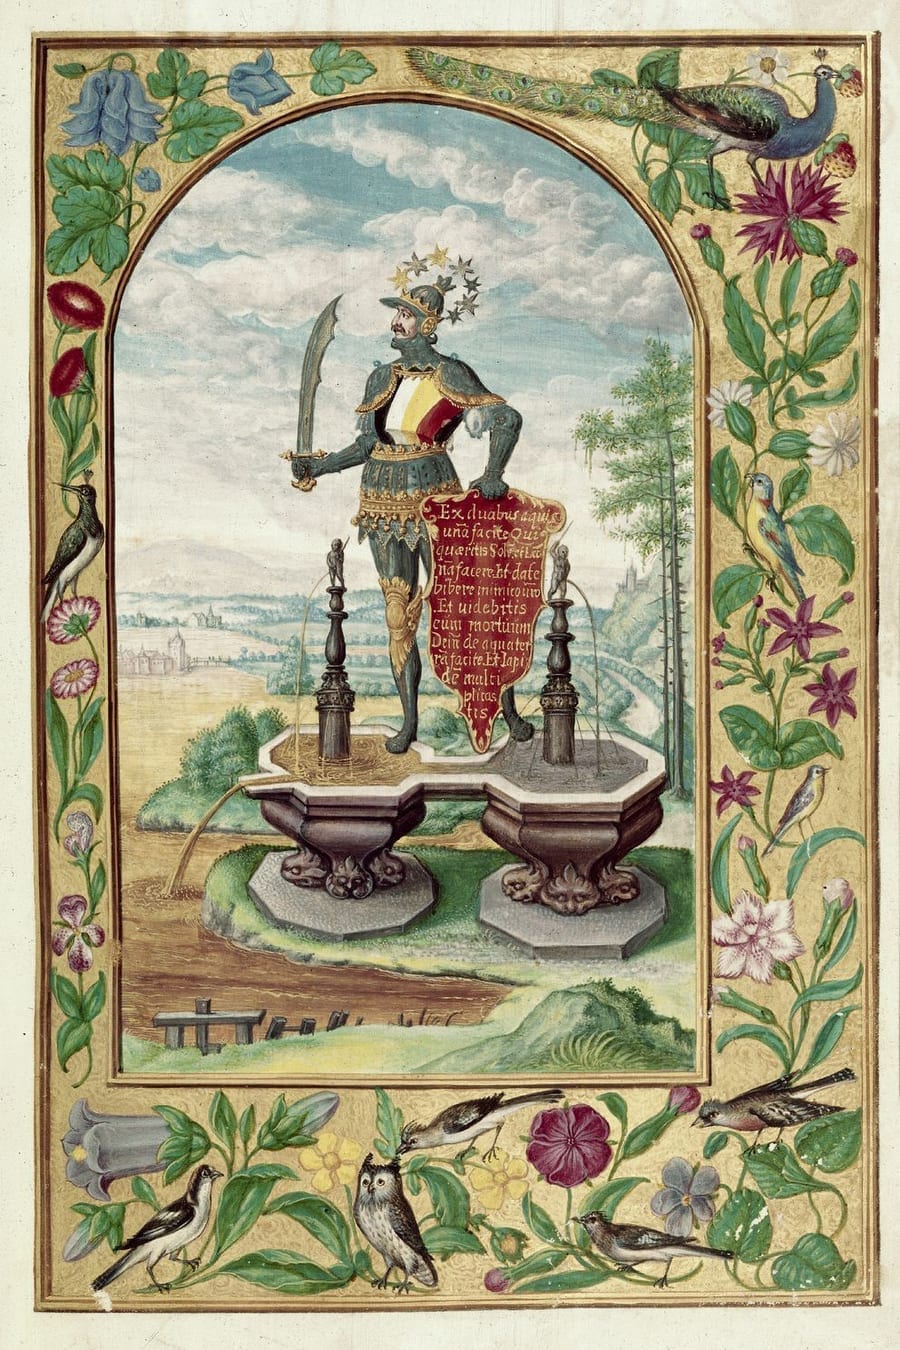 Illustration of knight with a drawn sword from the Alchemical manuscript Splendor Solis